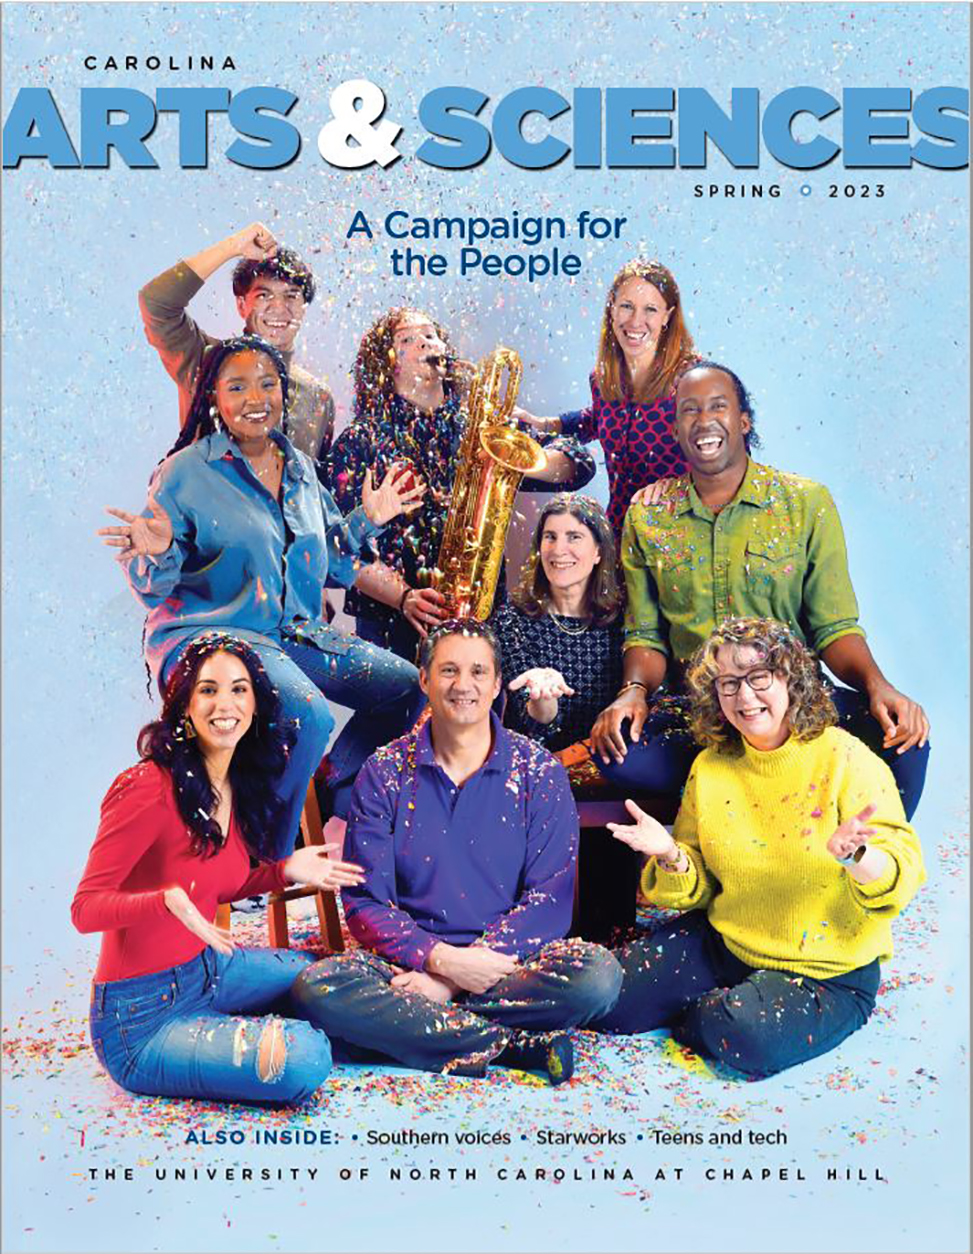 Spring 2023 magazine cover features a group of peole celebrating with confetti